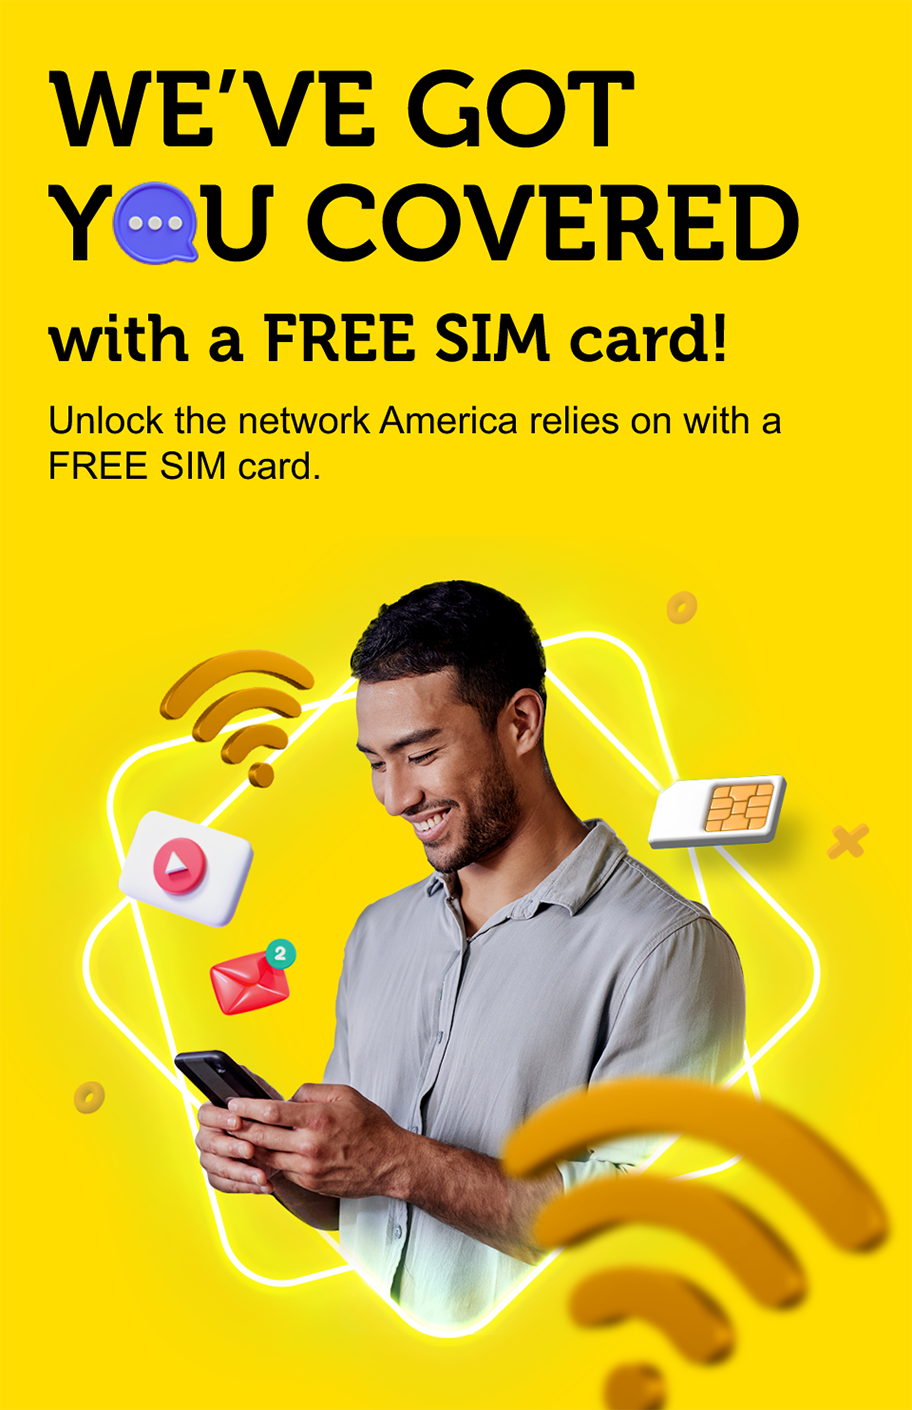 We've got you covered with a free phone*!